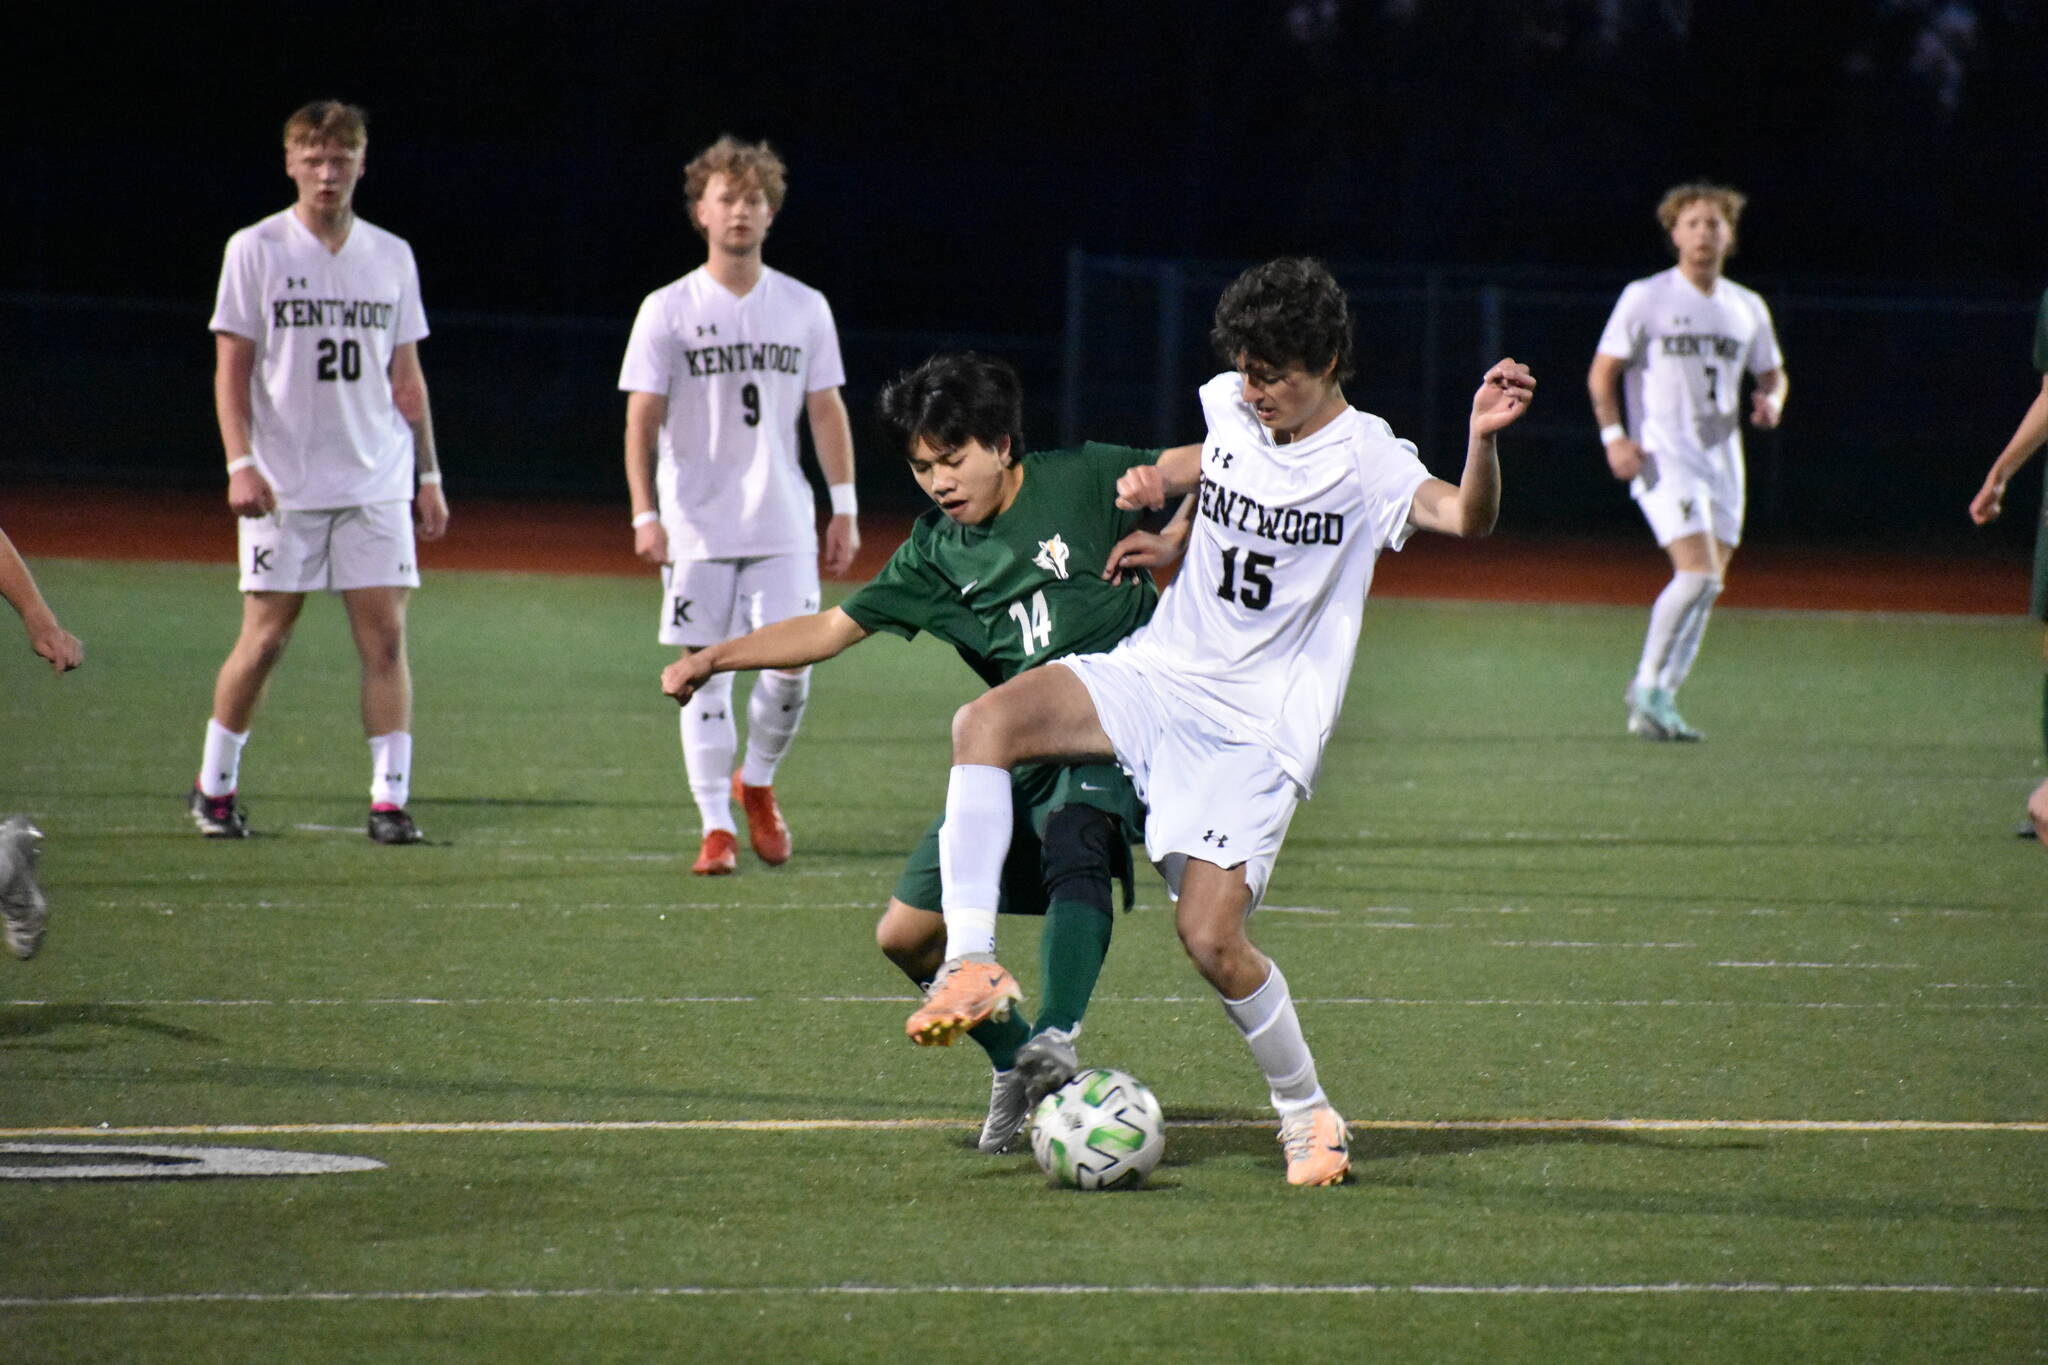 Ellis Nguyen and a Kentwood player fight to control the ball at Kentridge High School. Ben Ray / The Reporter